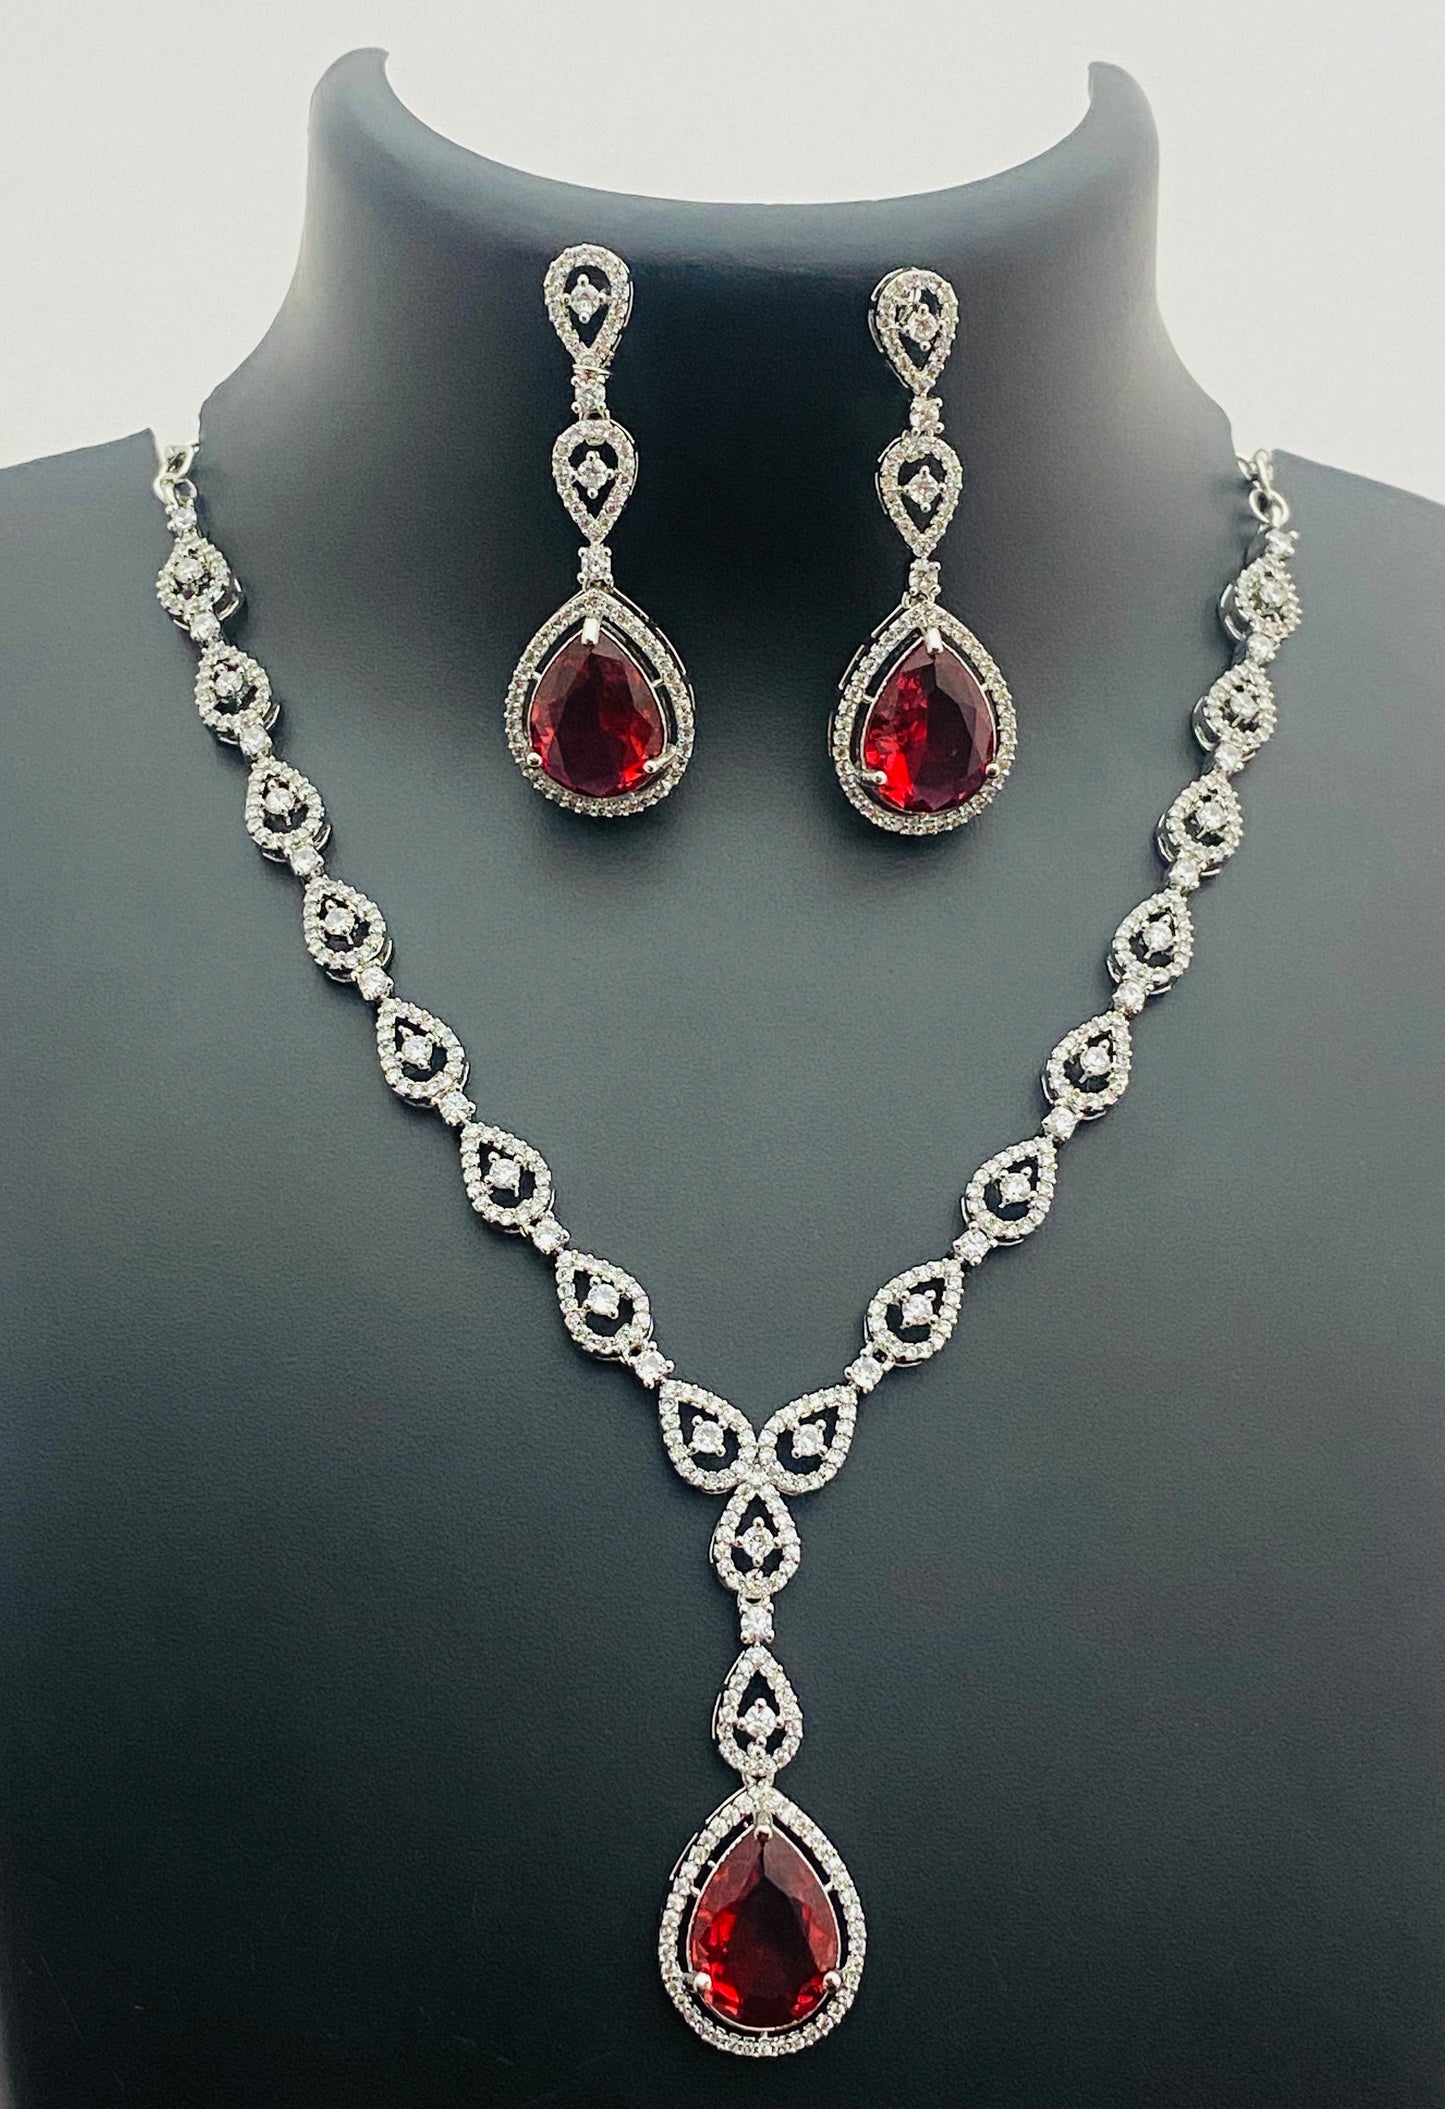  American Diamond Necklace With Earring Sets In USA